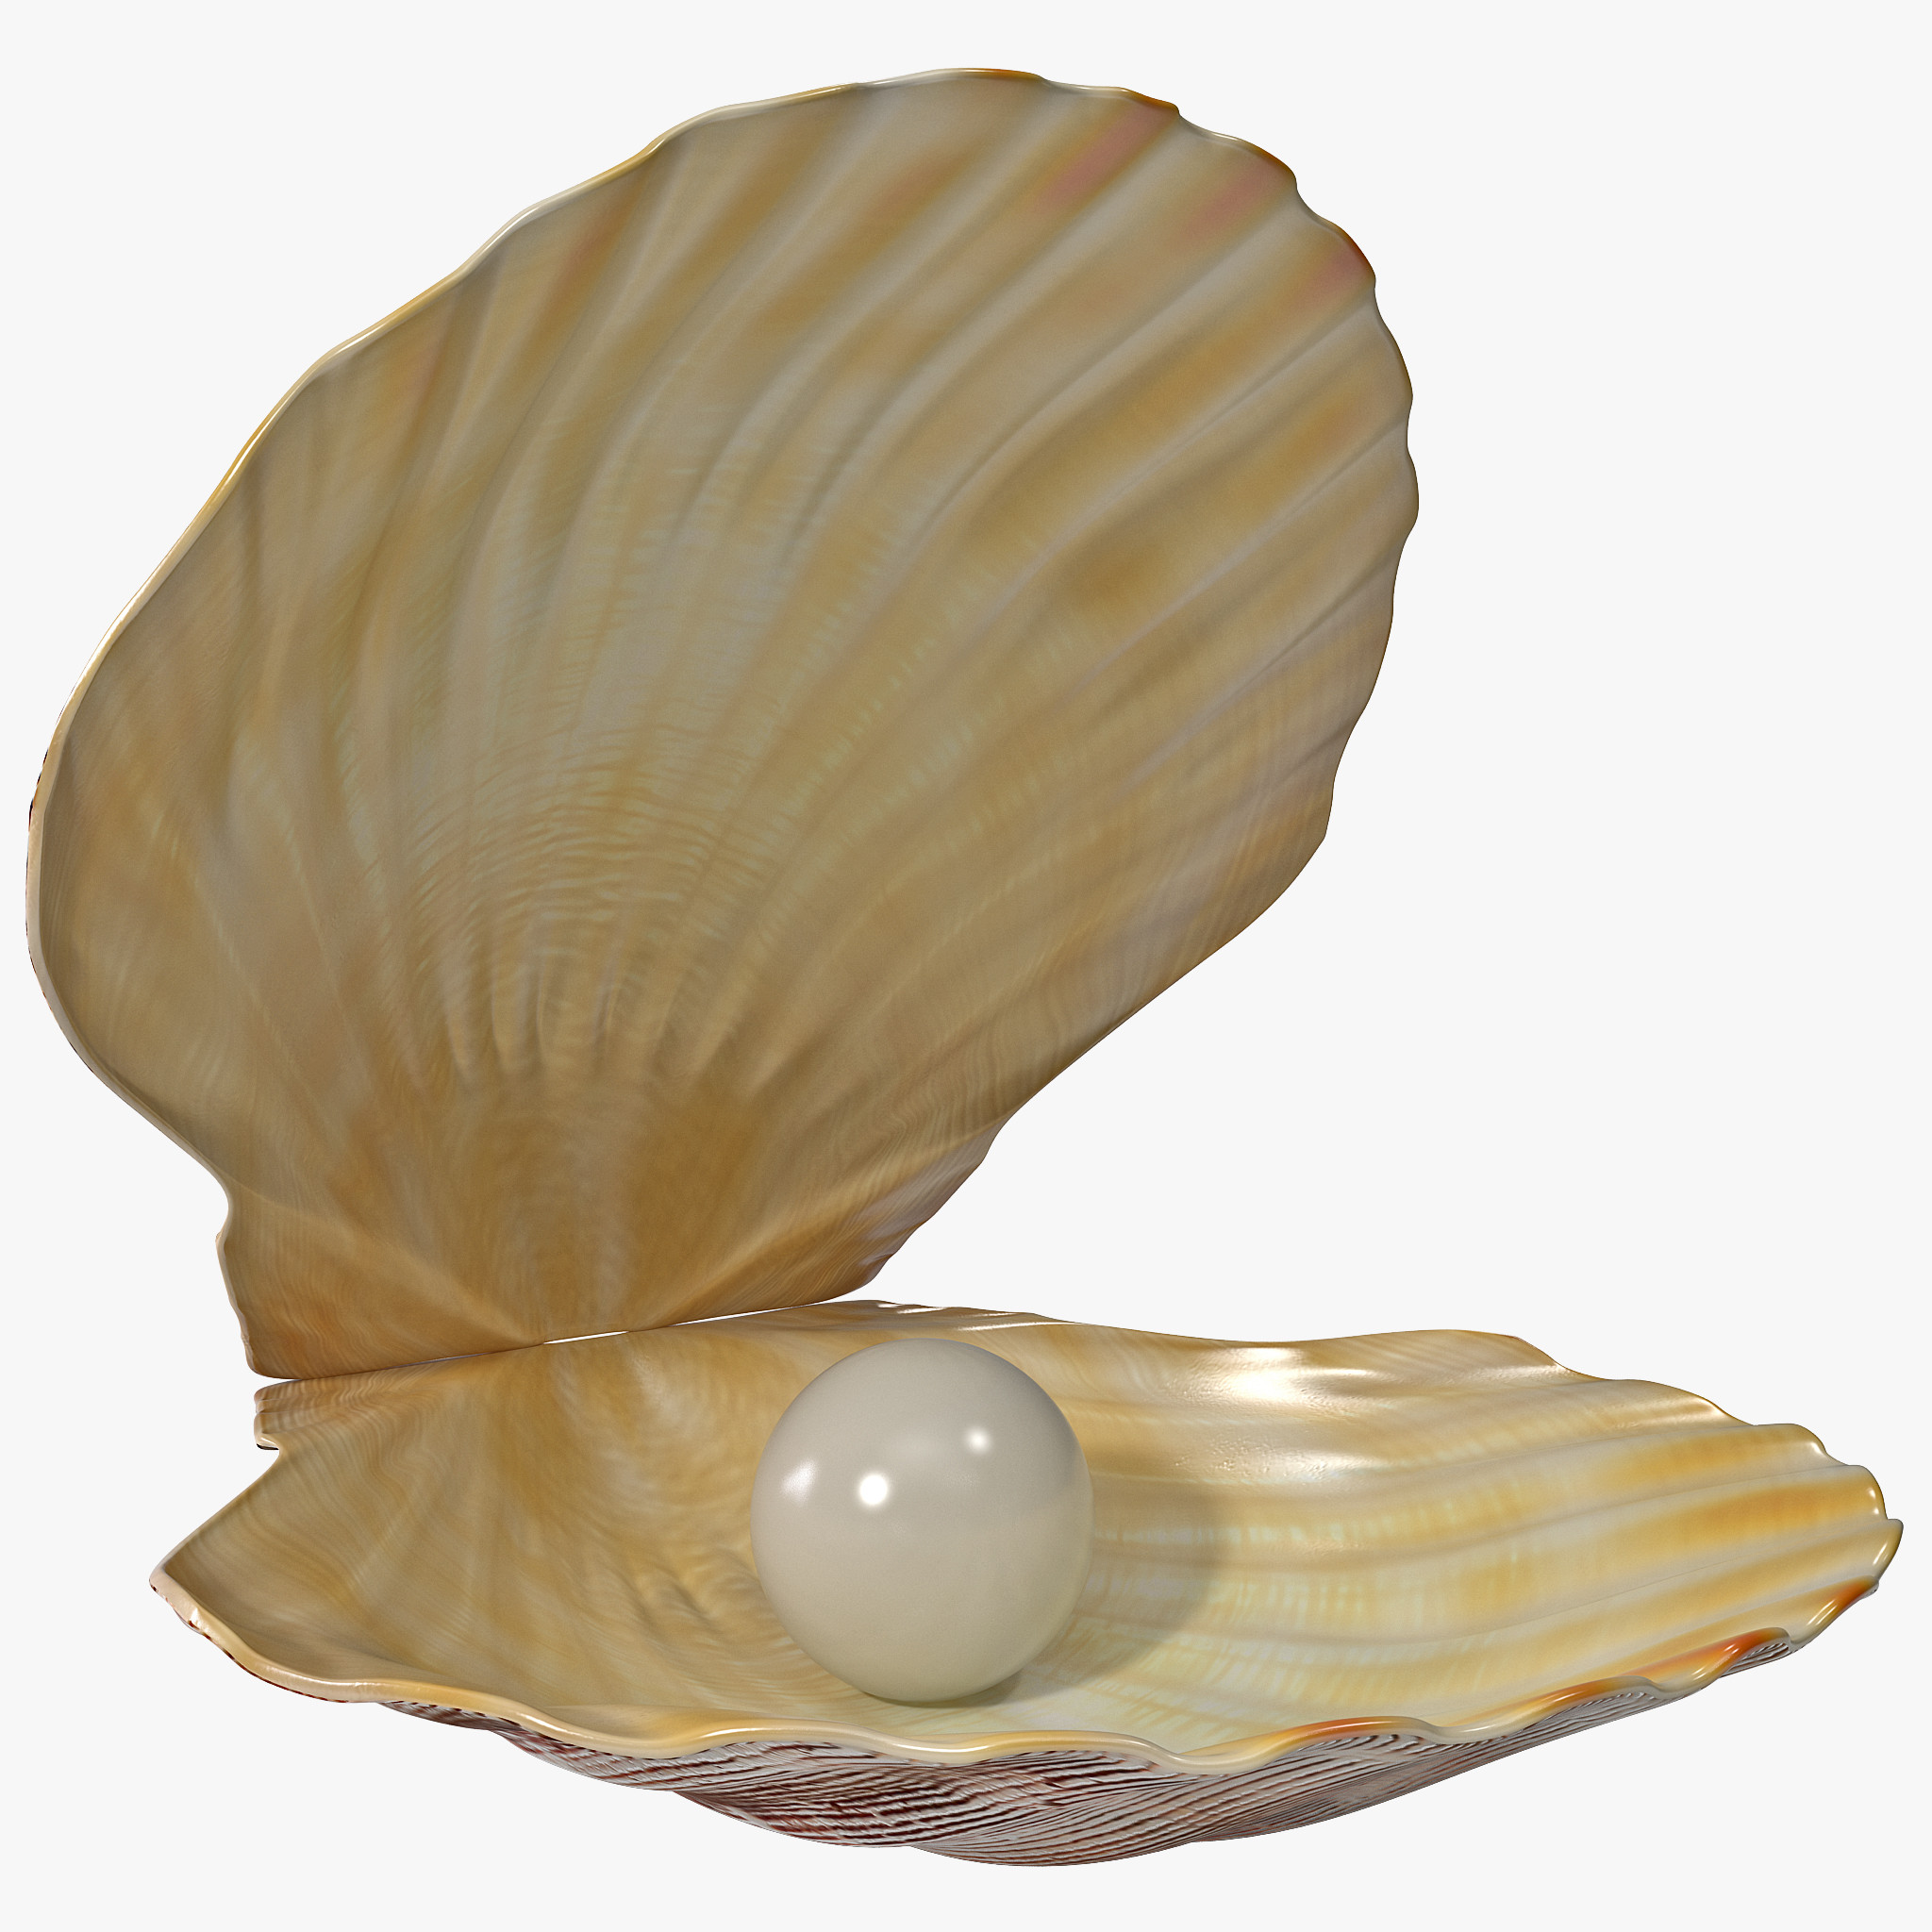 Open Oyster PNG - 73104